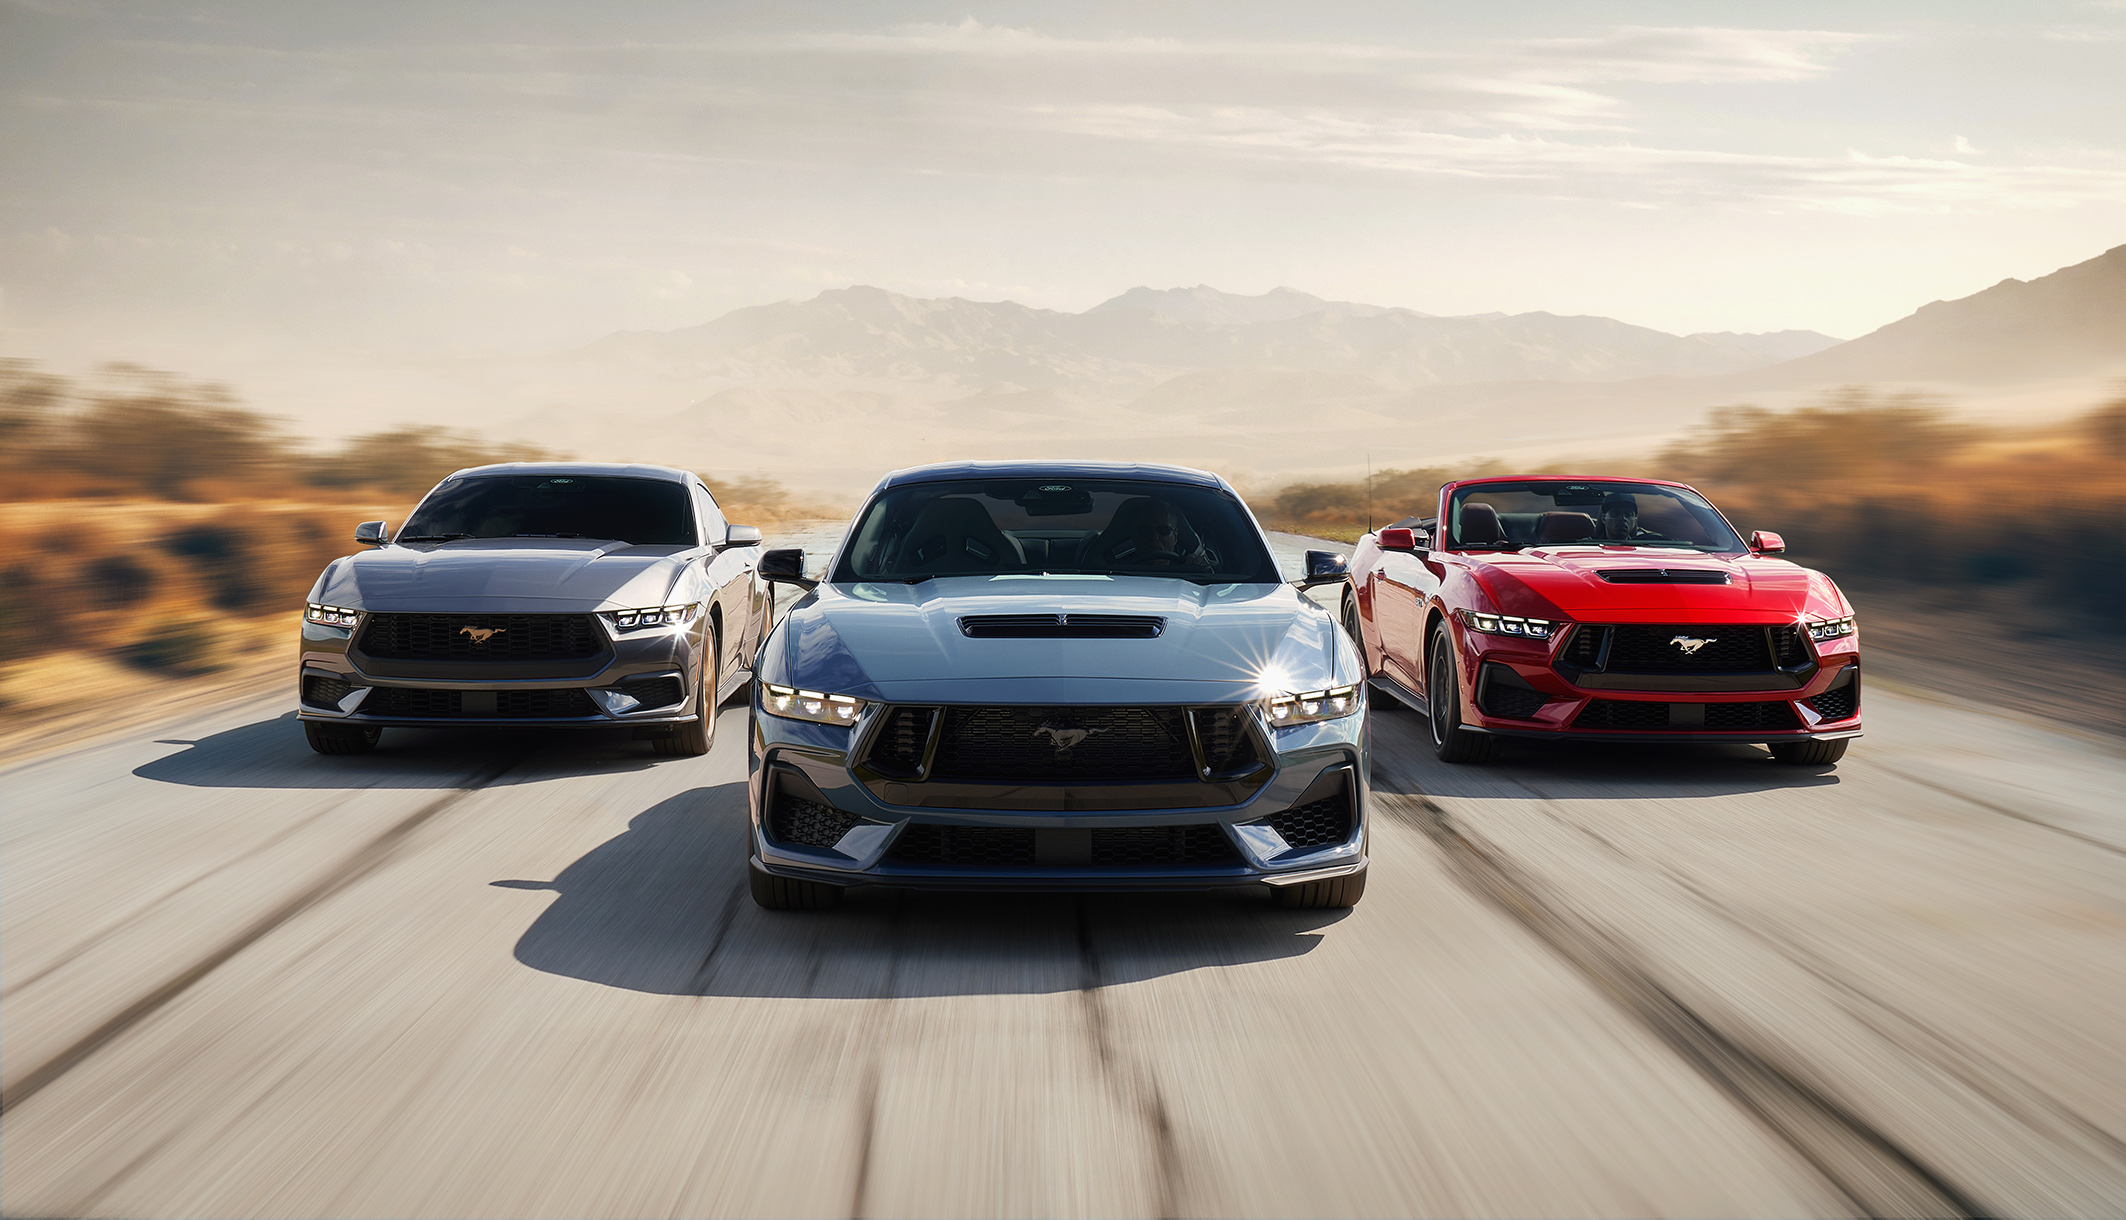 There are three 2024 Ford Mustang models from the seventh generation.  A blue model, a red model and a gray model, all seen from the front moving down the road.